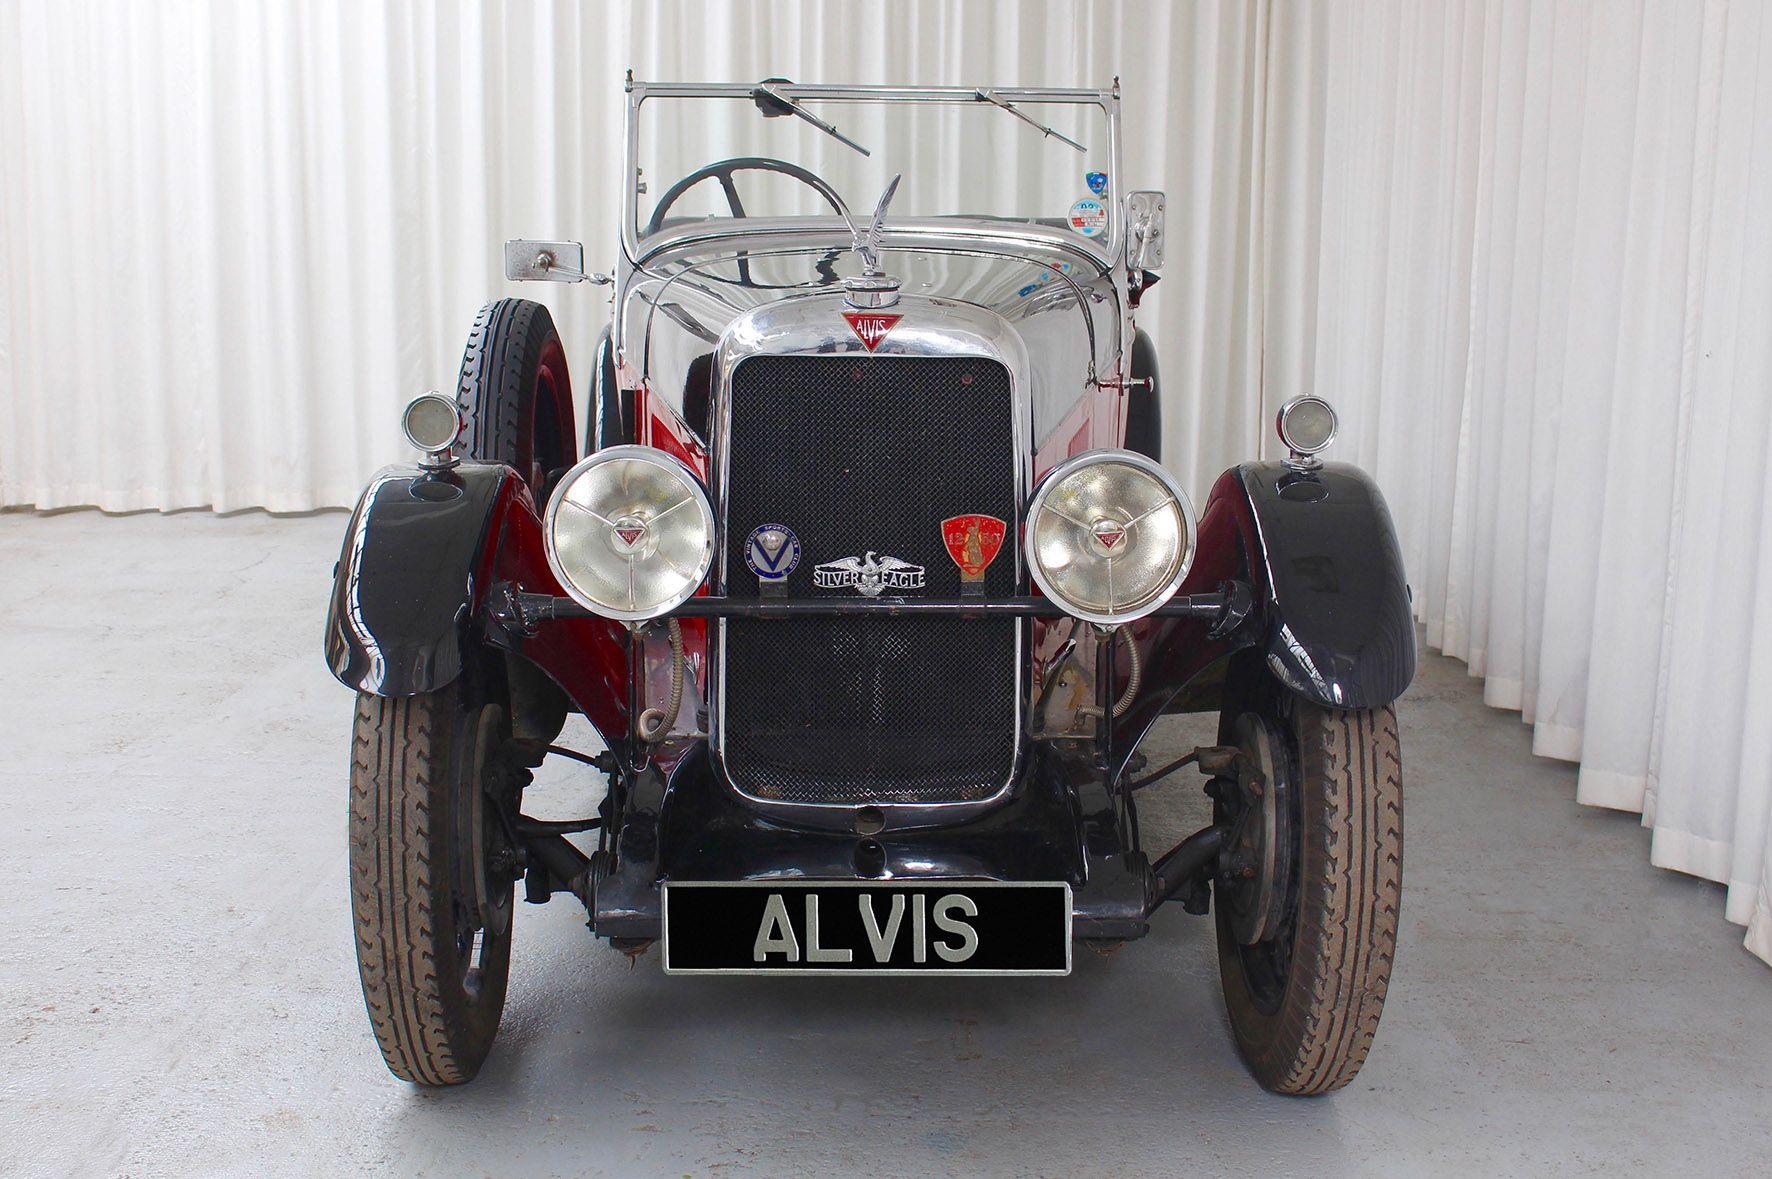 Silver Car with Red Triangle Logo - 31seagbbckc - Red Triangle - Alvis Parts, Restoration and Car Sales